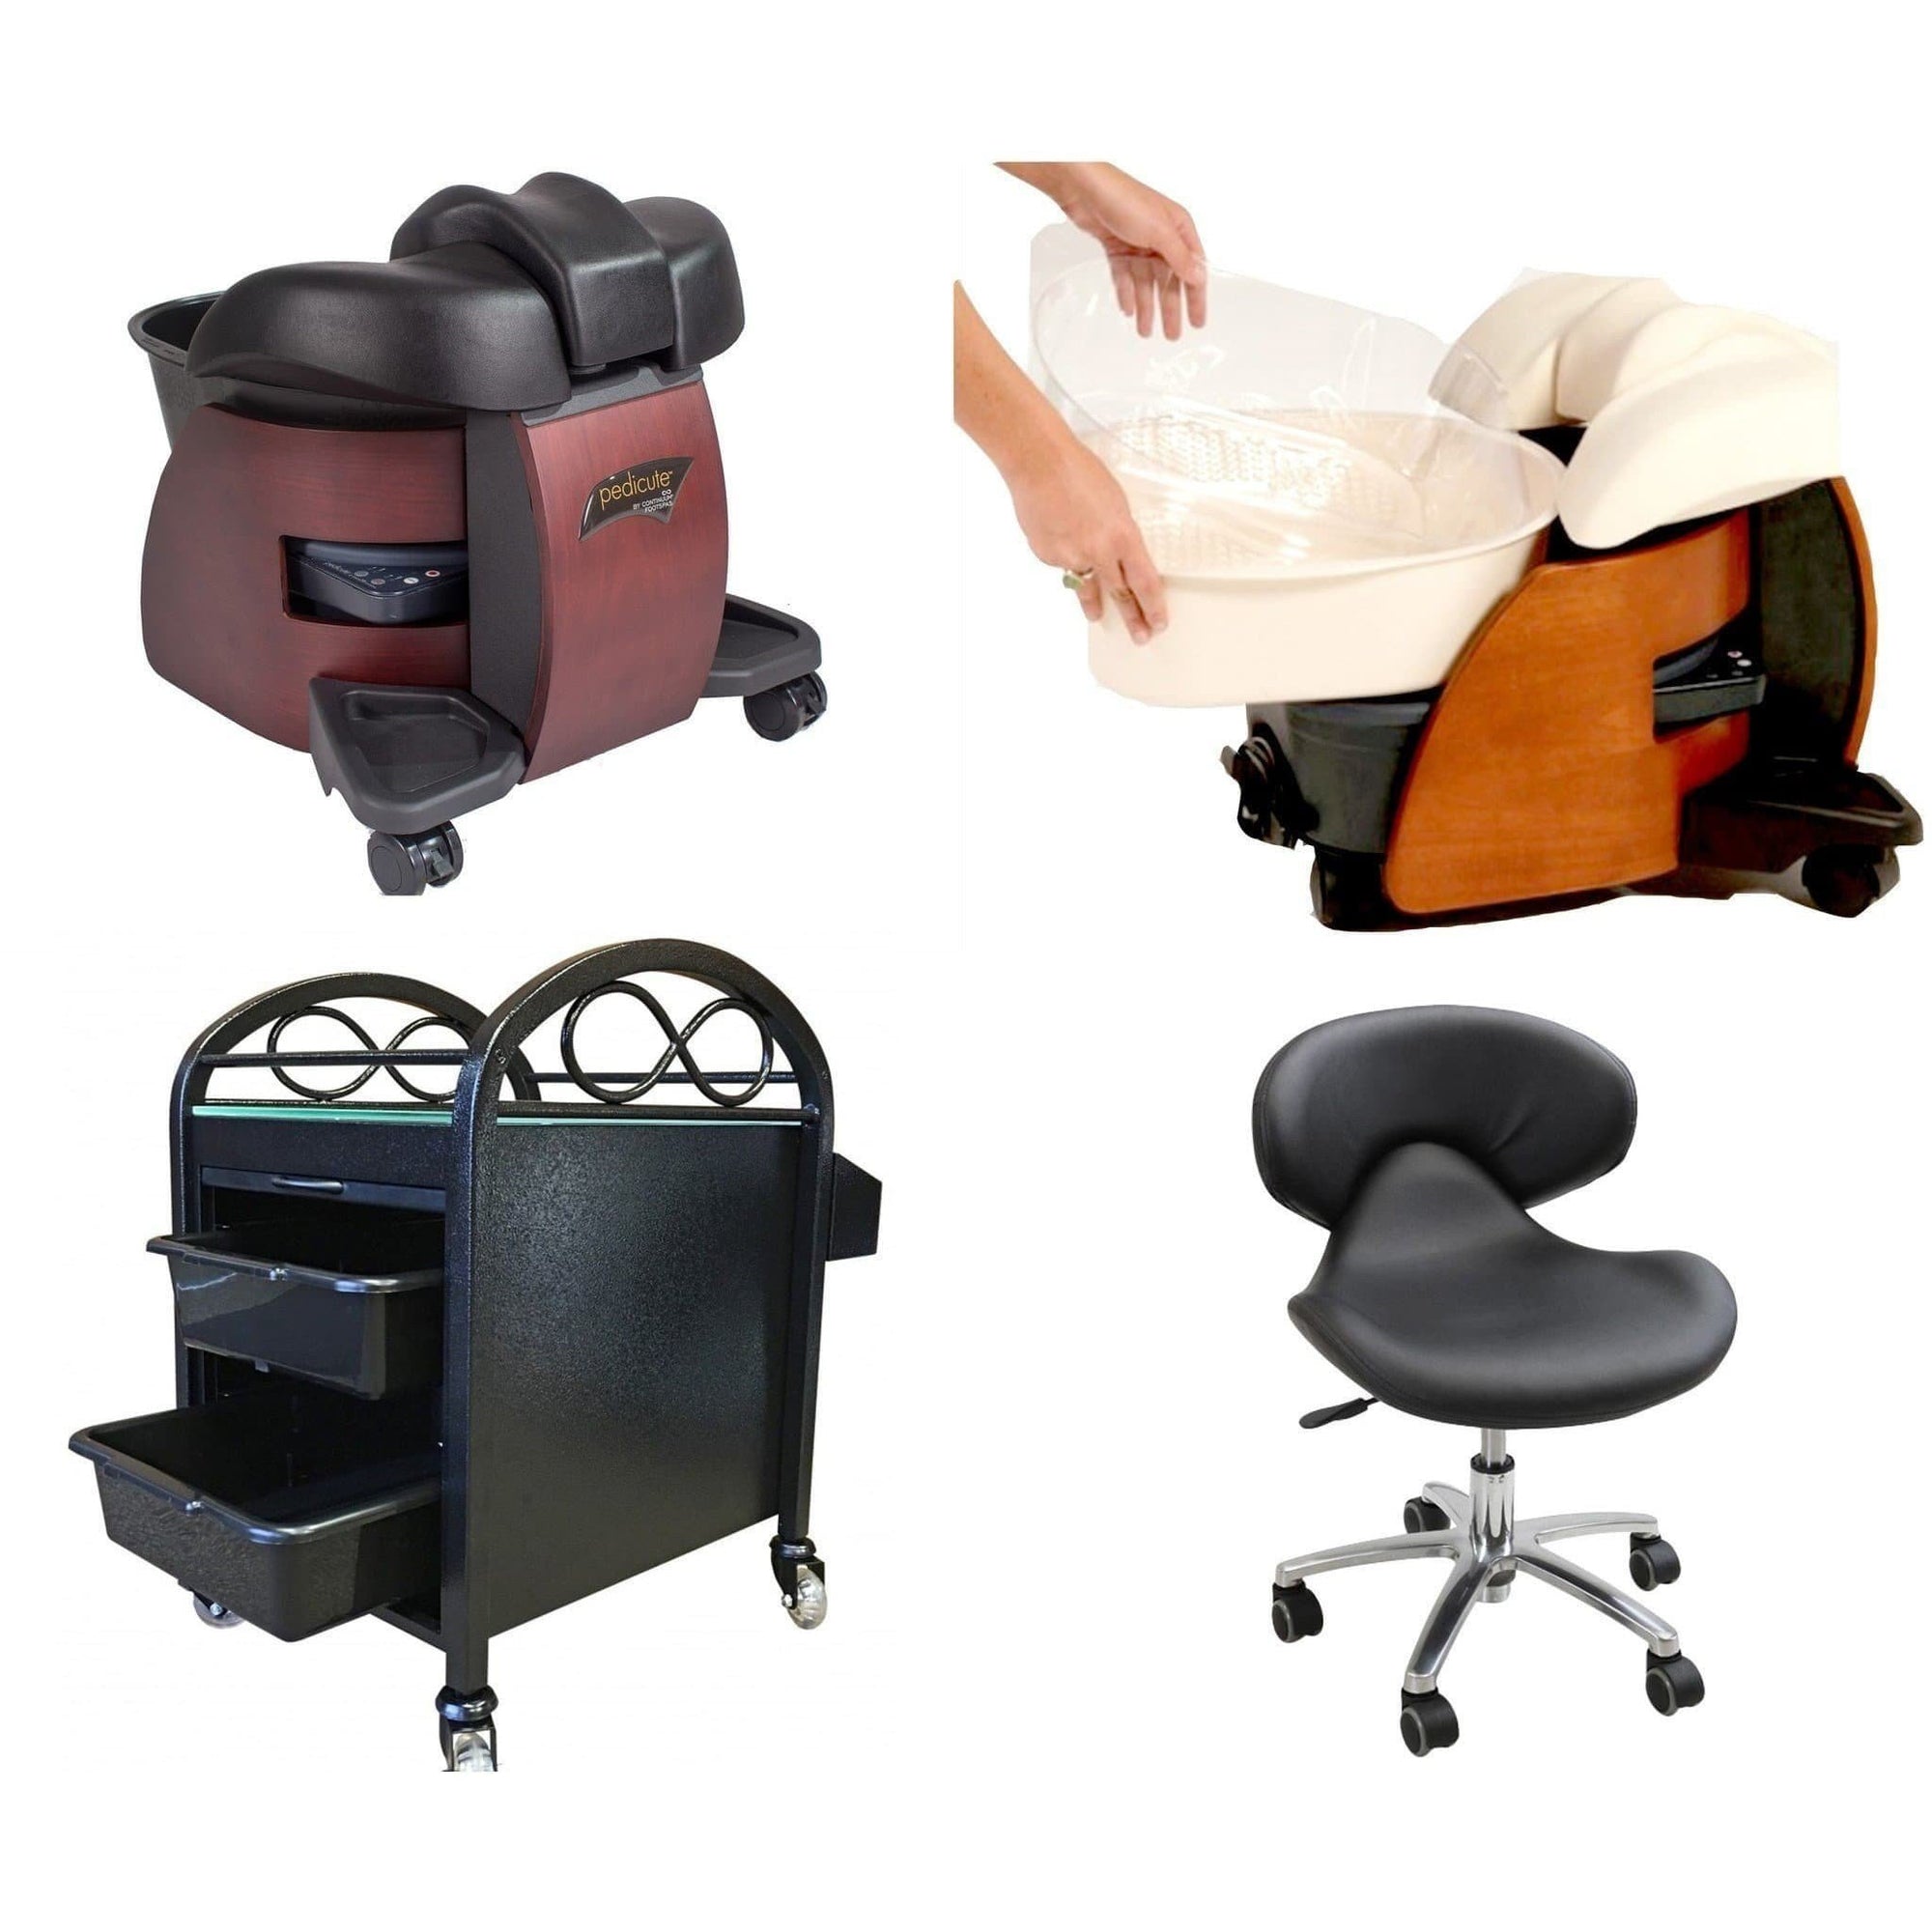 Continuum Continuum Pedicute Standard Portable Spa Package Pedicure & Spa Chairs - ChairsThatGive